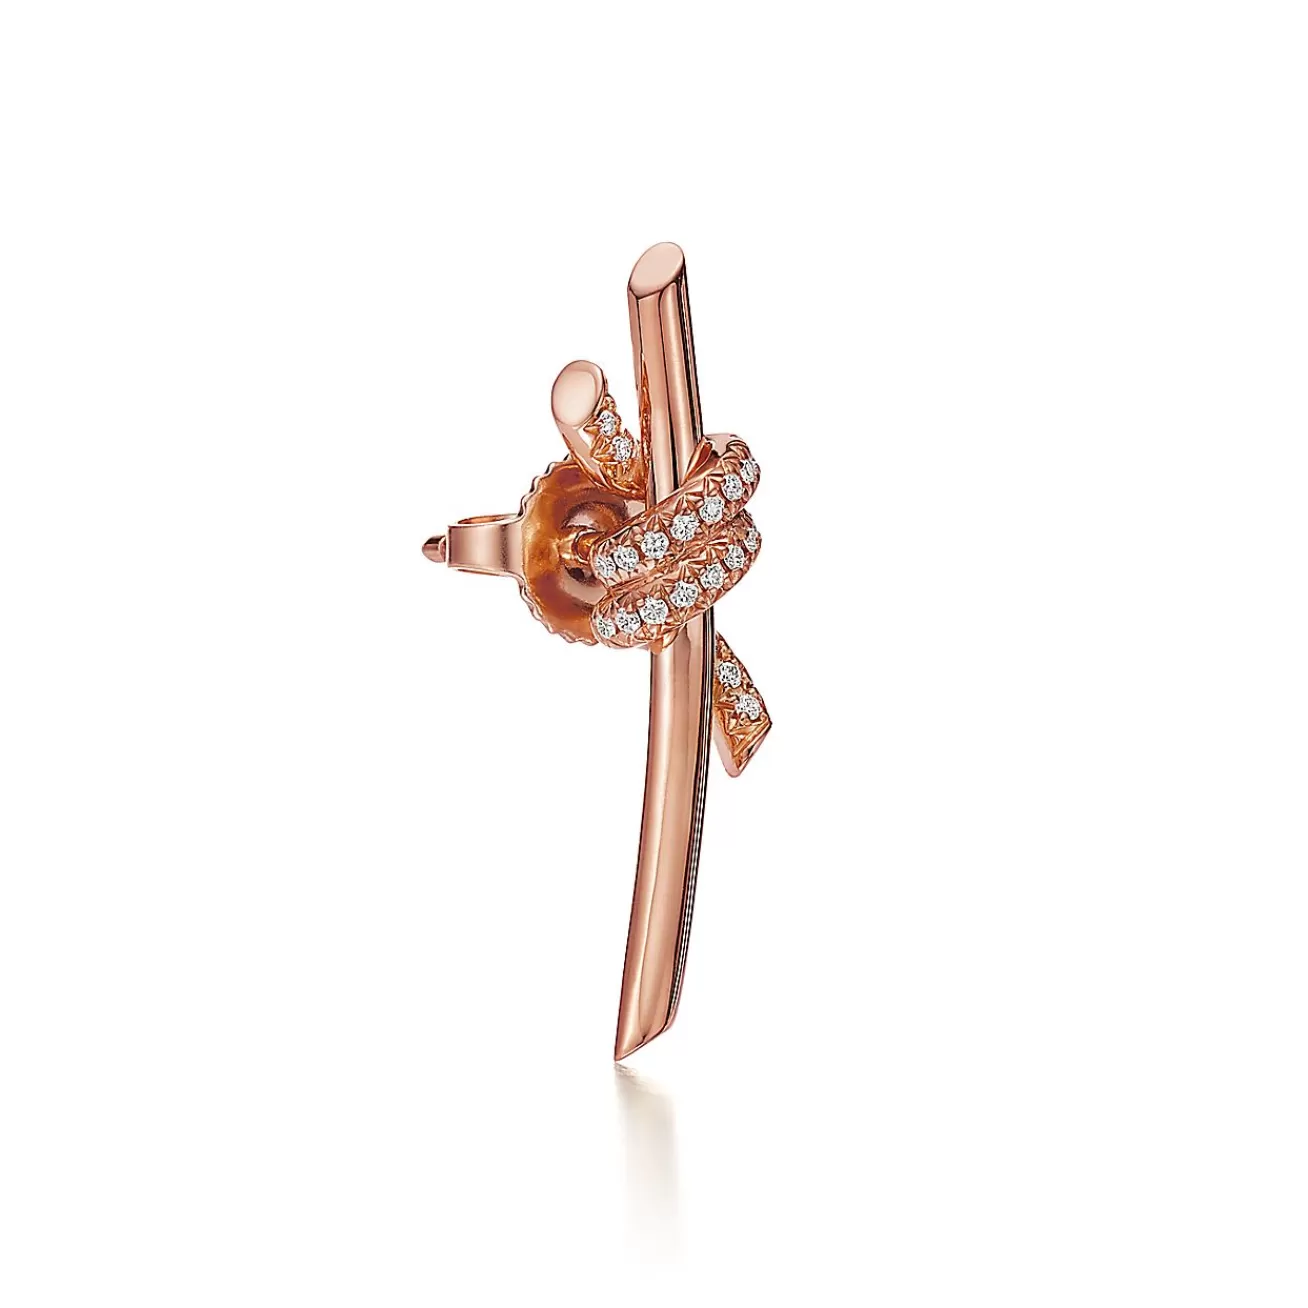 Tiffany & Co. Tiffany Knot Earrings in Rose Gold with Diamonds | ^ Earrings | Gifts for Her